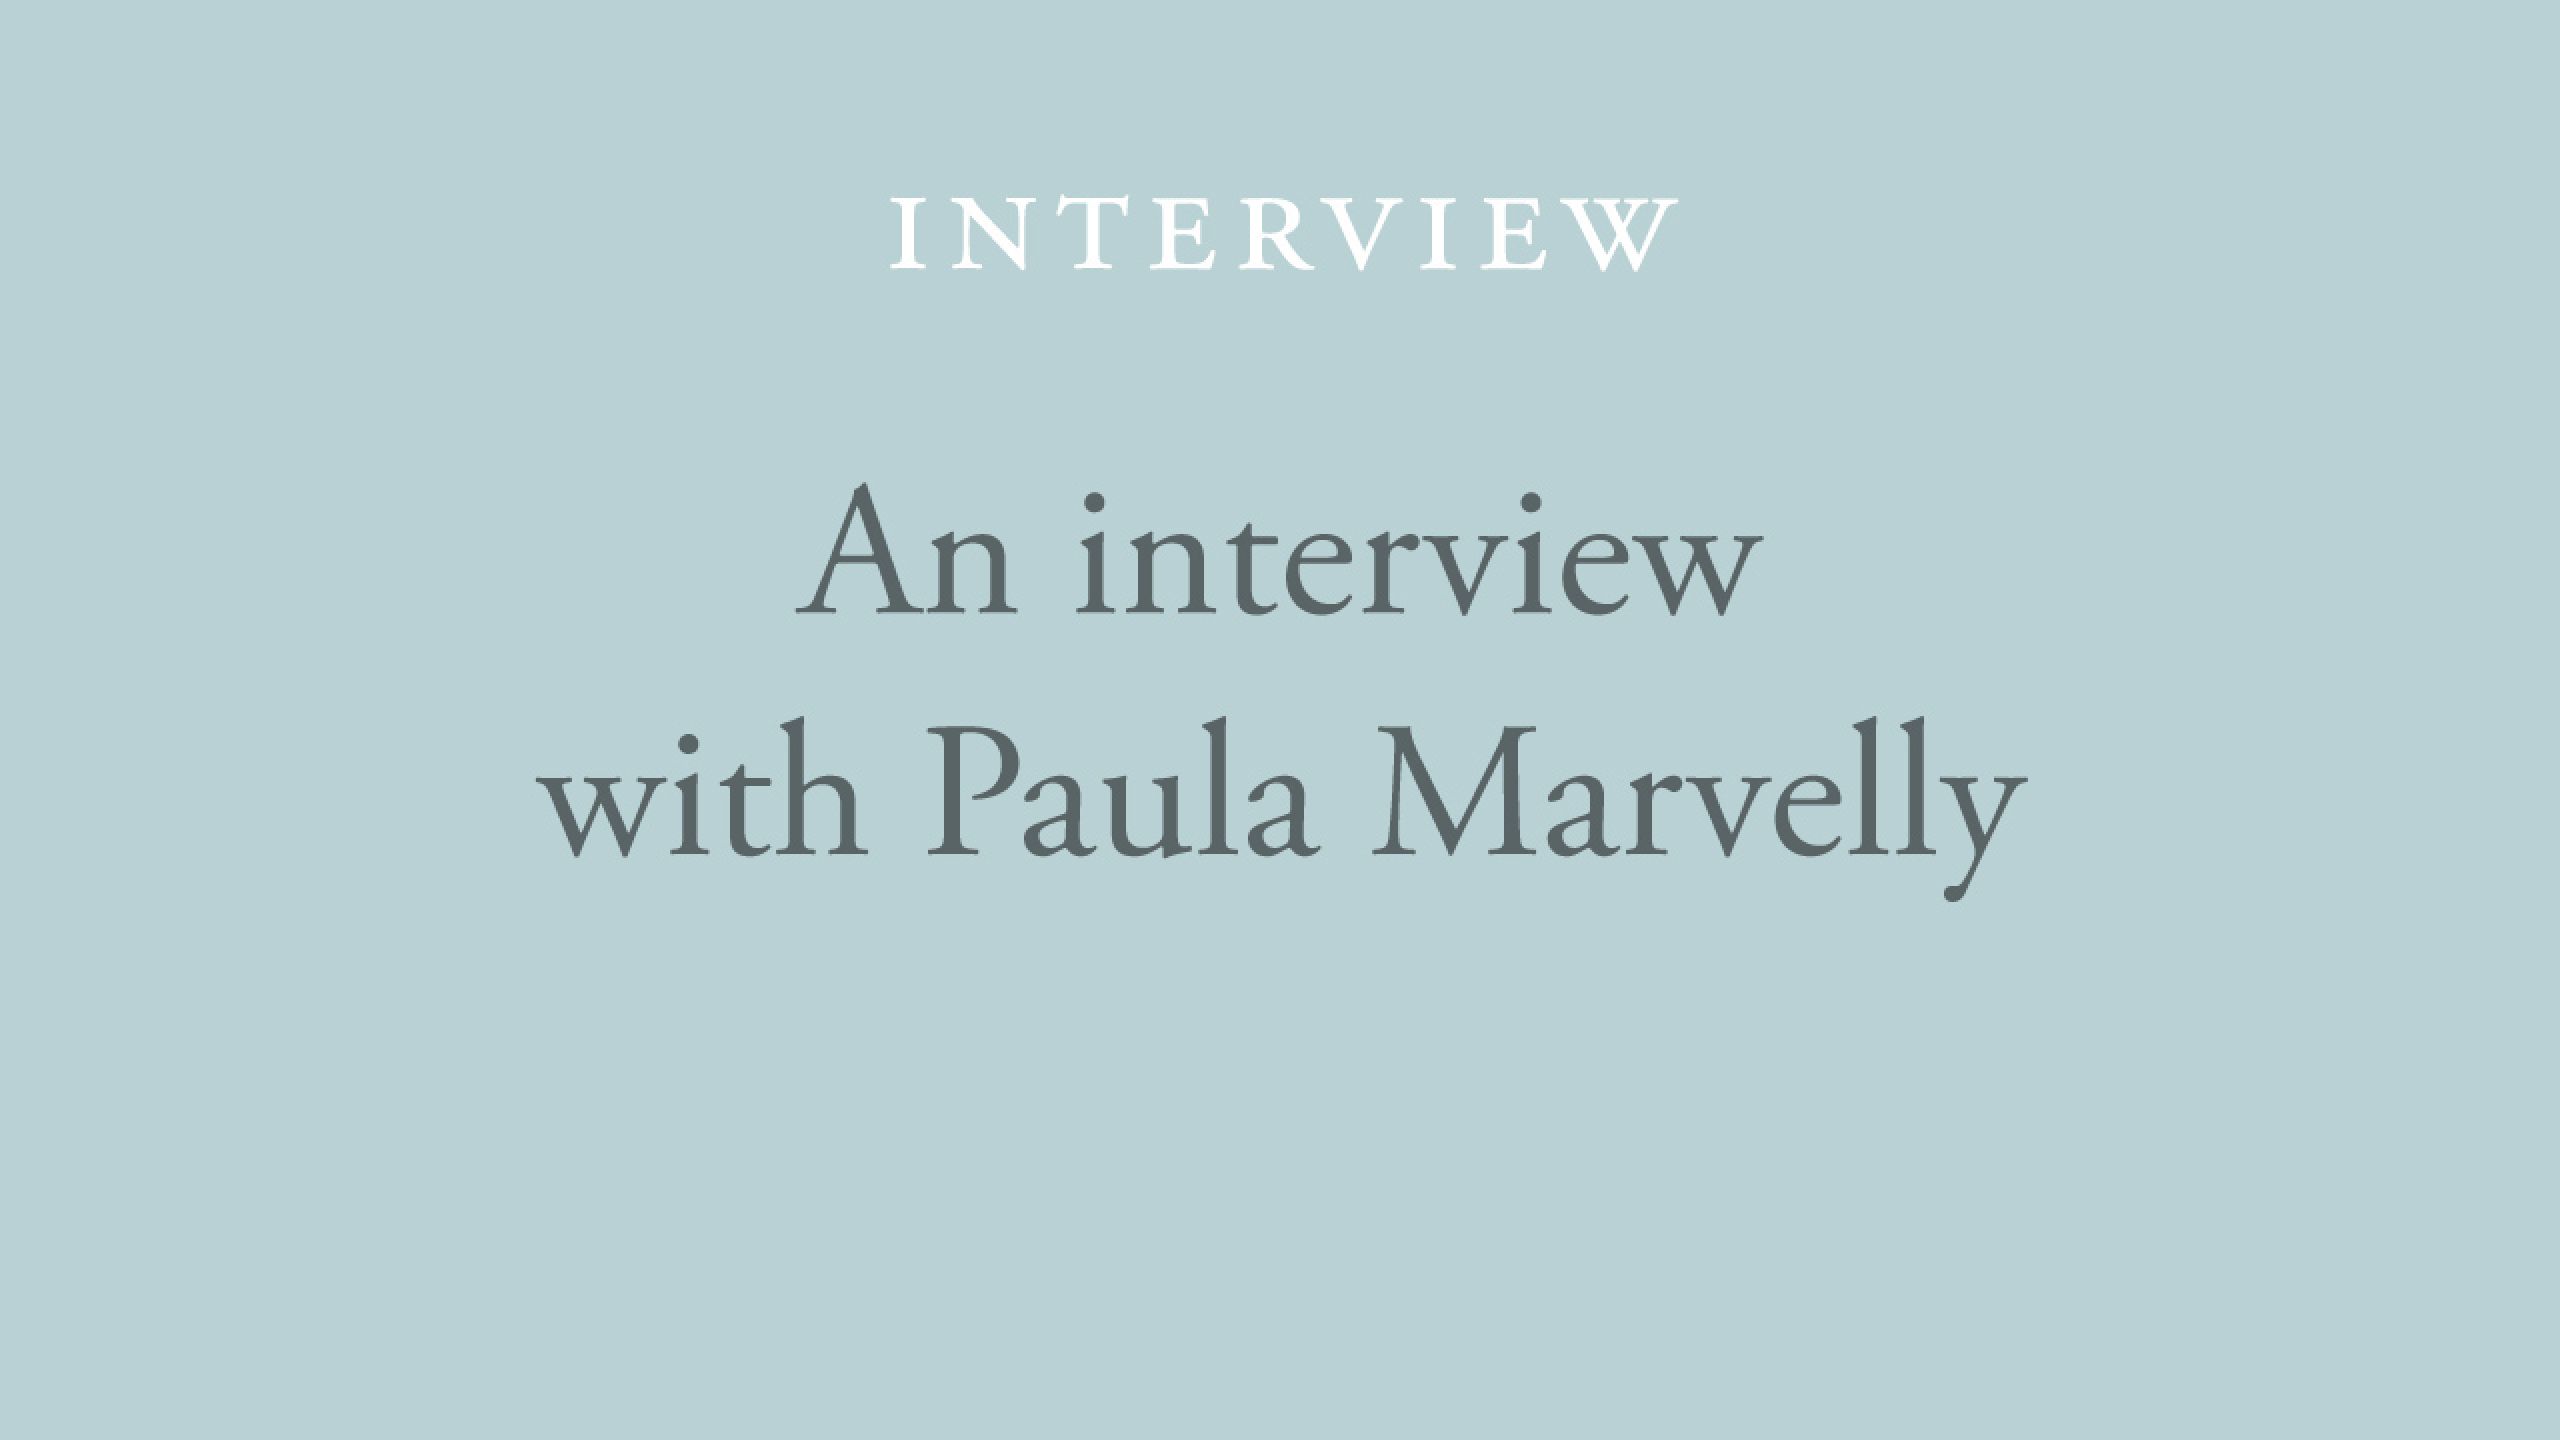 Interview with Paula Marvelly: Contemplating the Nature of Experience